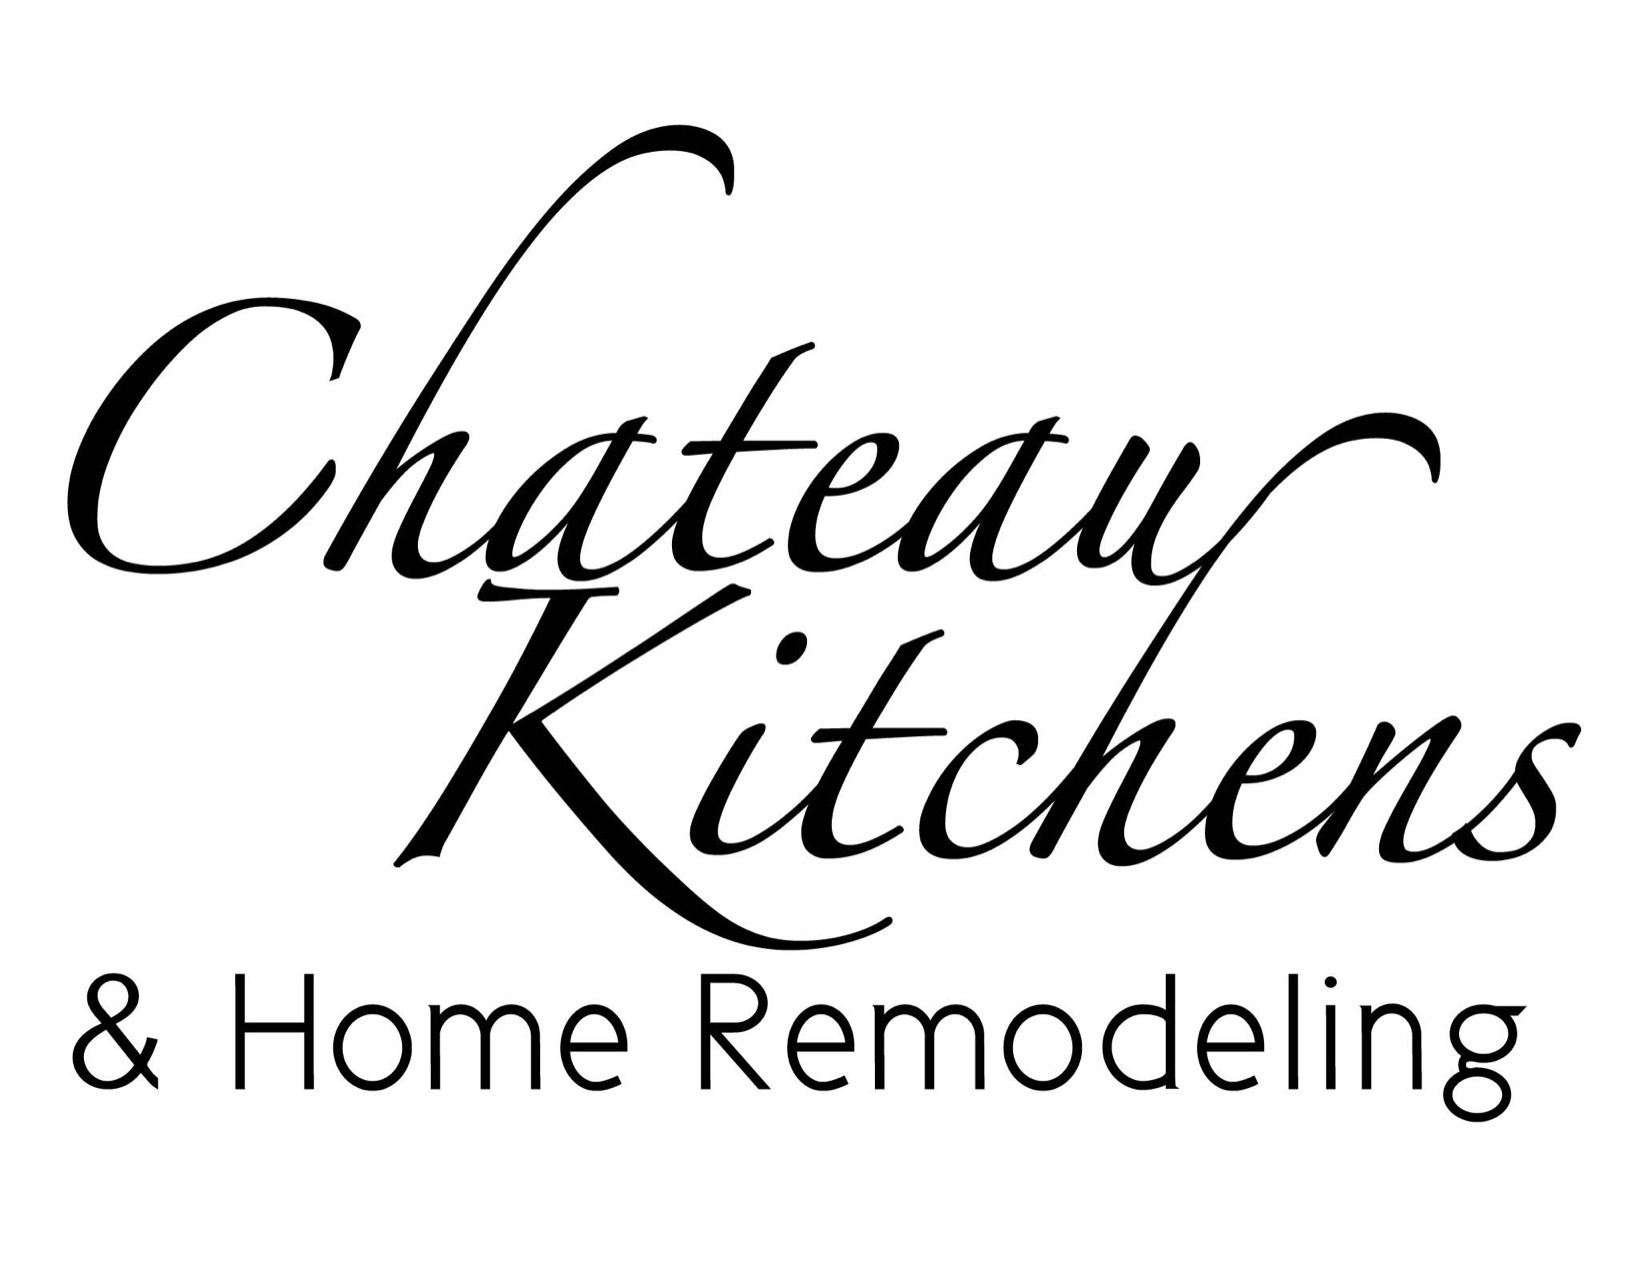 Chateau Kitchens & Home Remodeling Logo